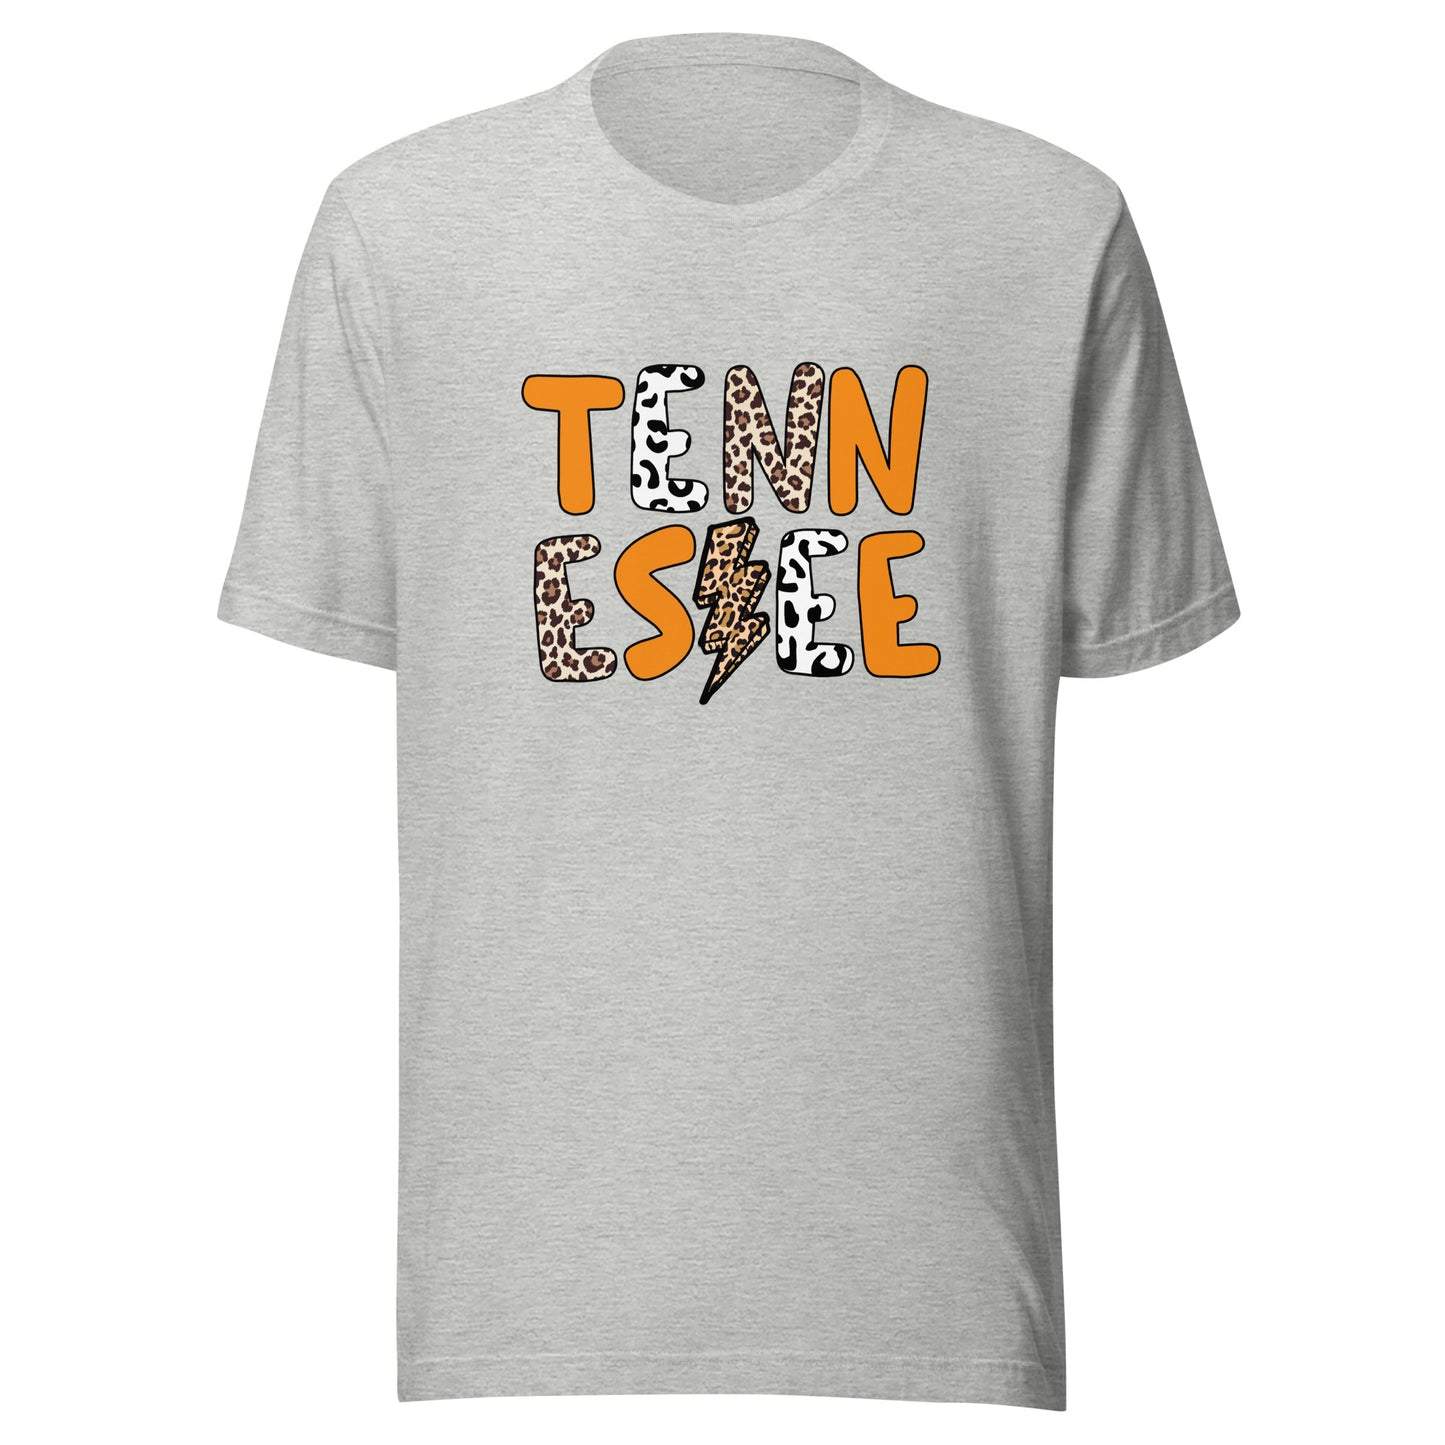 Tennessee t-shirt